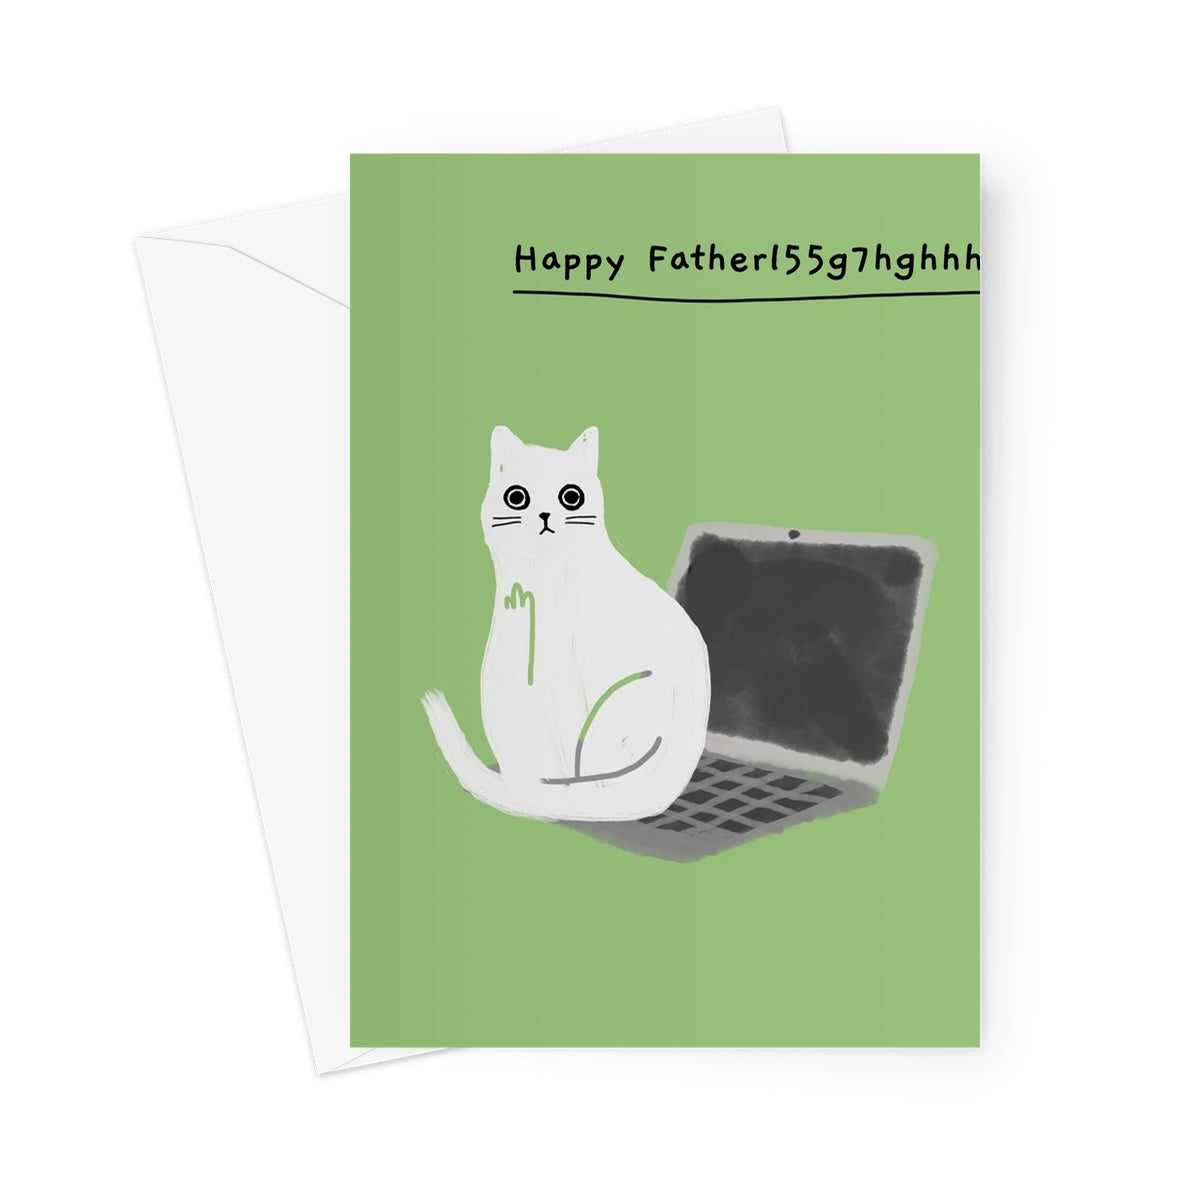 Ken the cat Father's Day card - Laptop typo - Ken sitting on laptop on green background